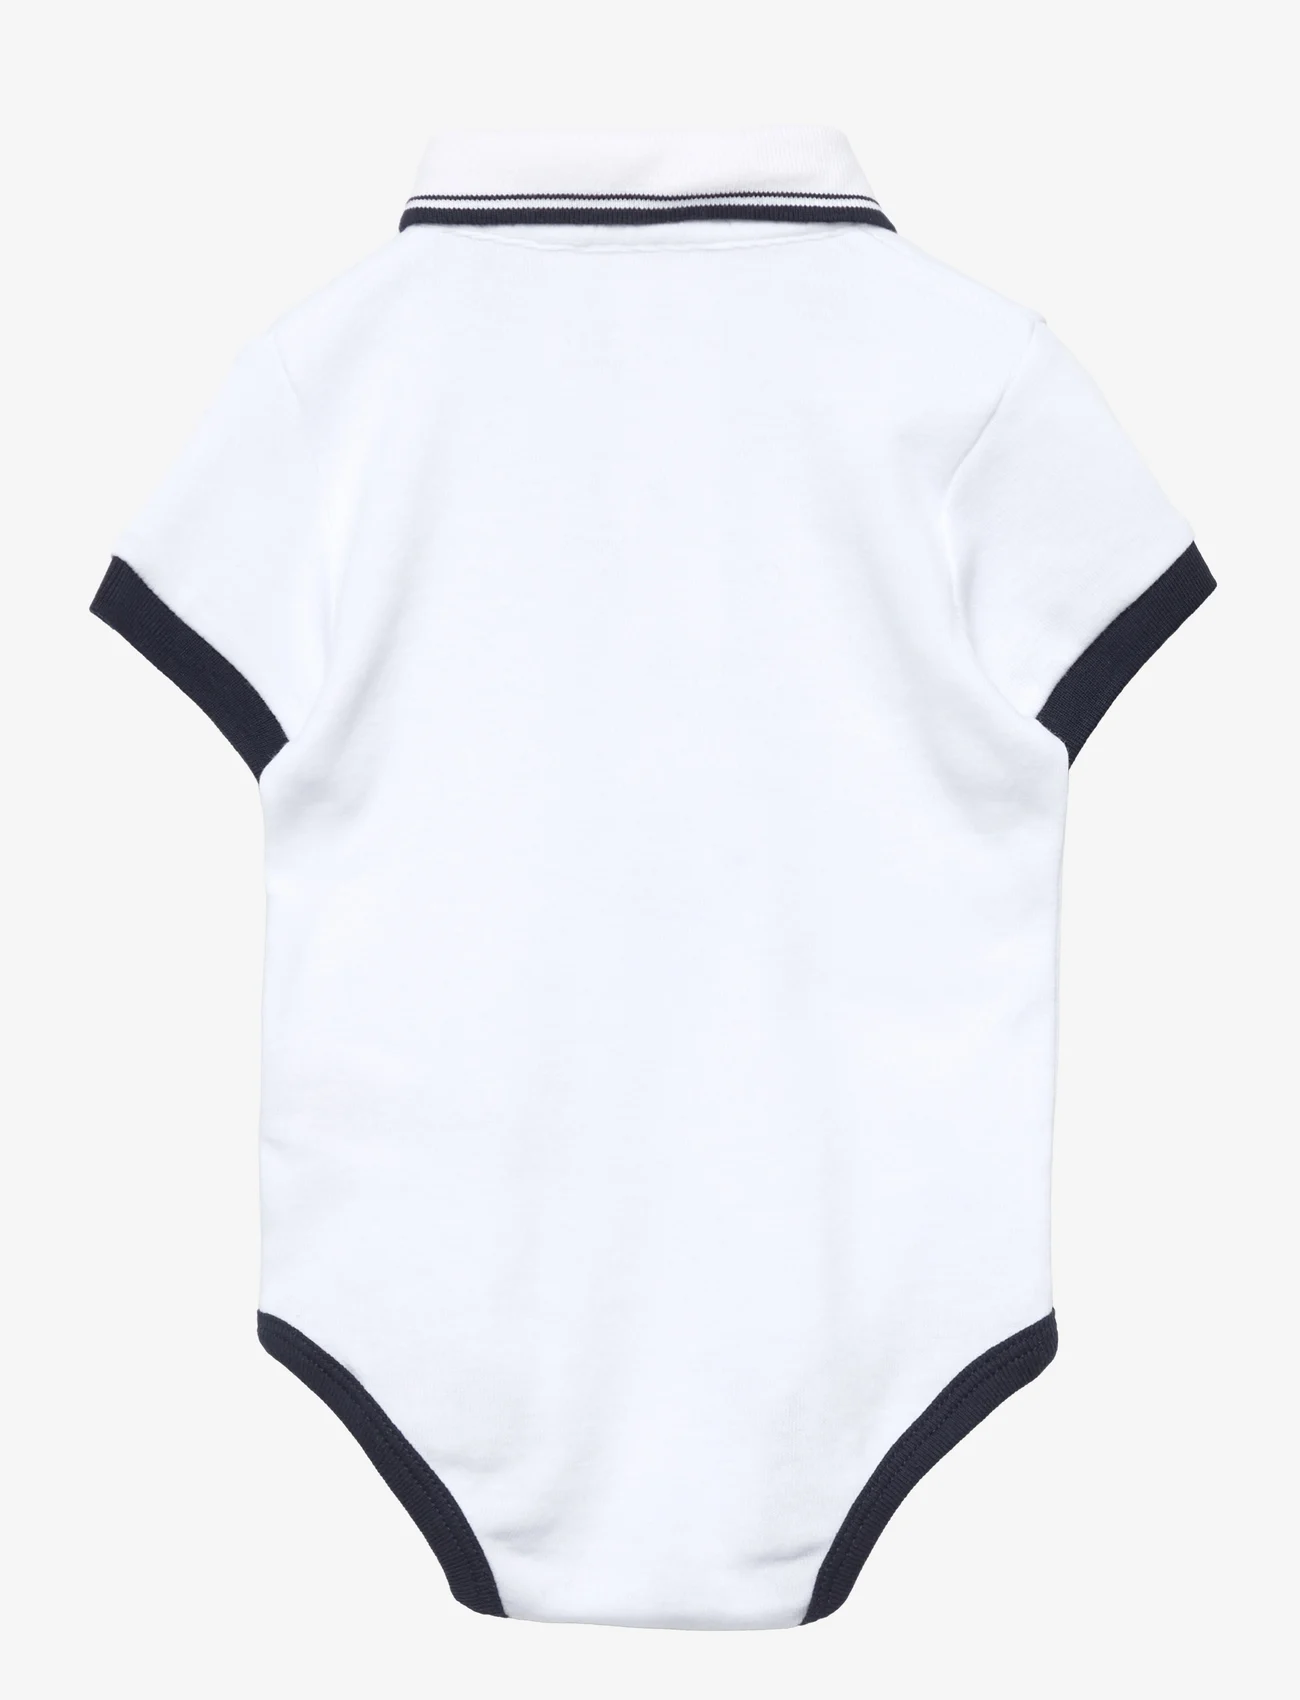 Lyle & Scott Junior - Tipped Polo Romper Hanging - lowest prices - bright white - 1